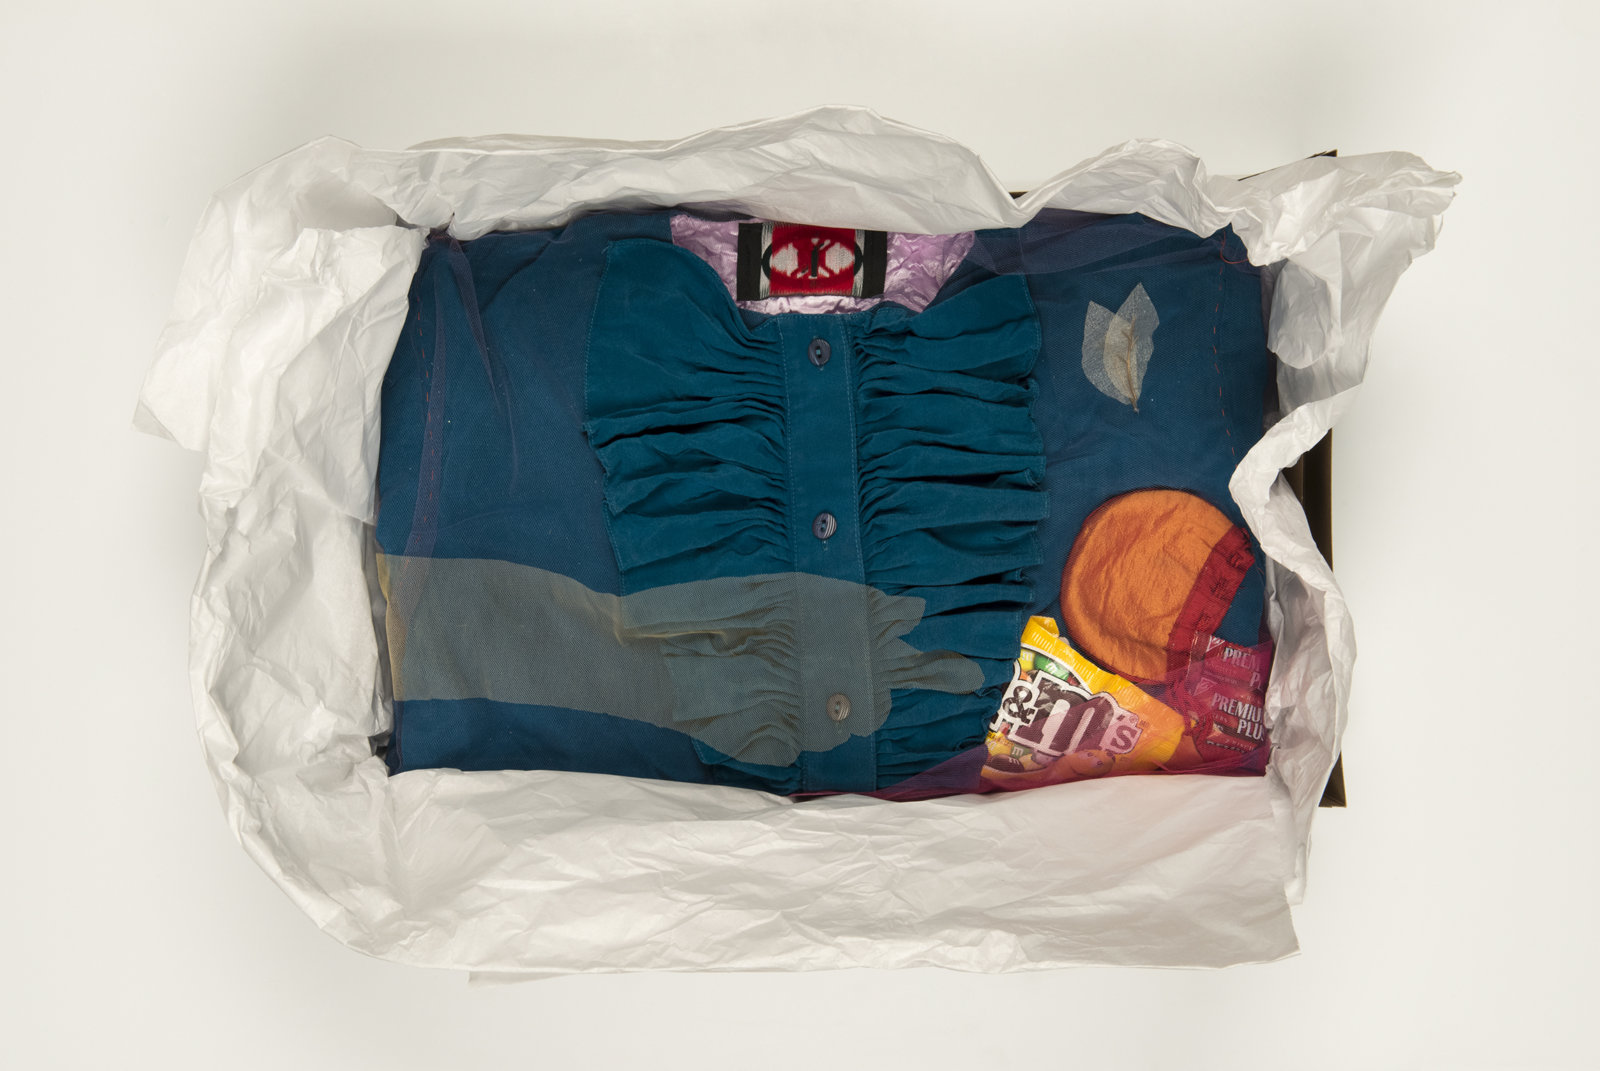 Liz Magor, Being This (M+M’s), 2012, paper, textiles, found materials, 11 x 17 x 3 in. (28 x 43 x 6 cm)